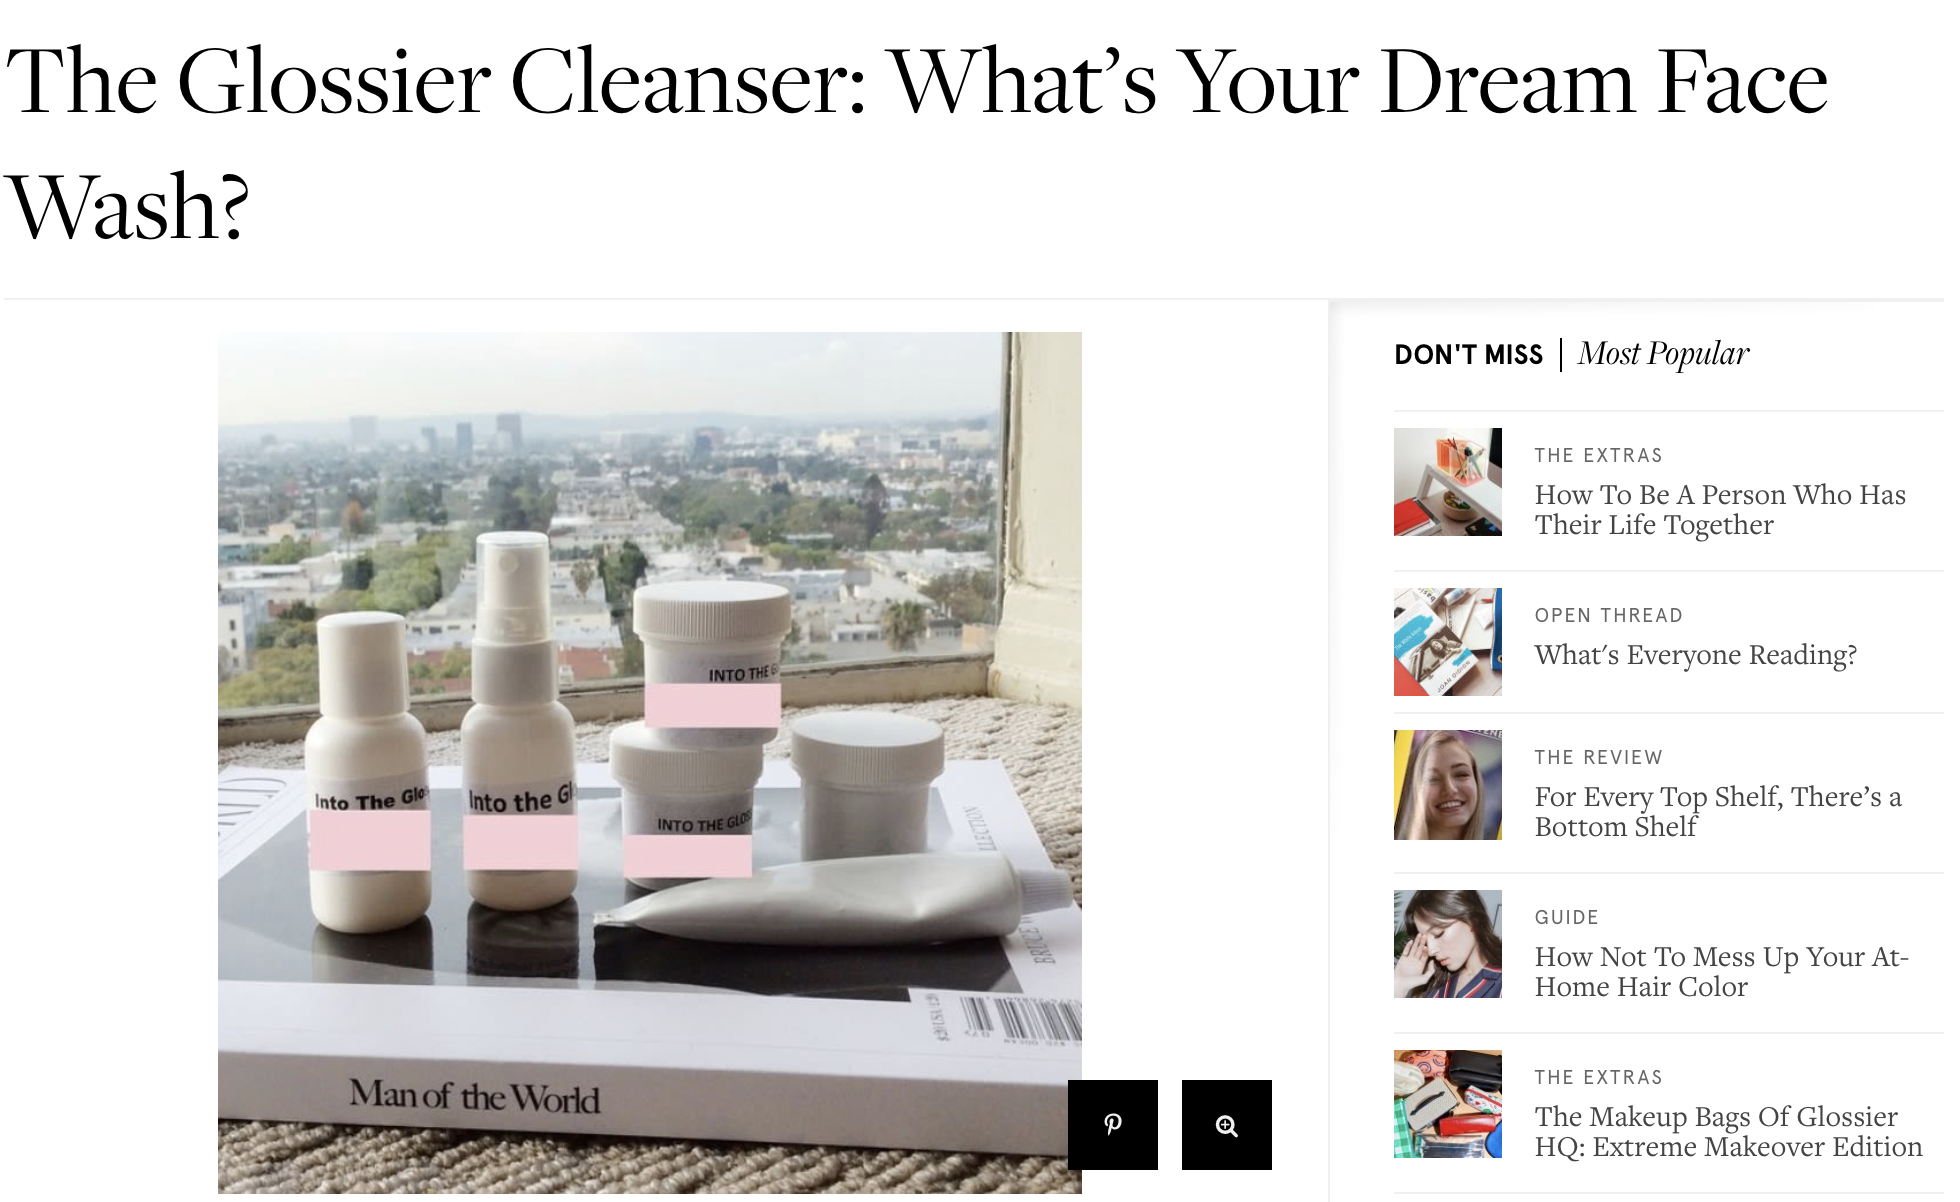 Loyalty in Beauty and Cosmetics - Glossier dream face wash survey